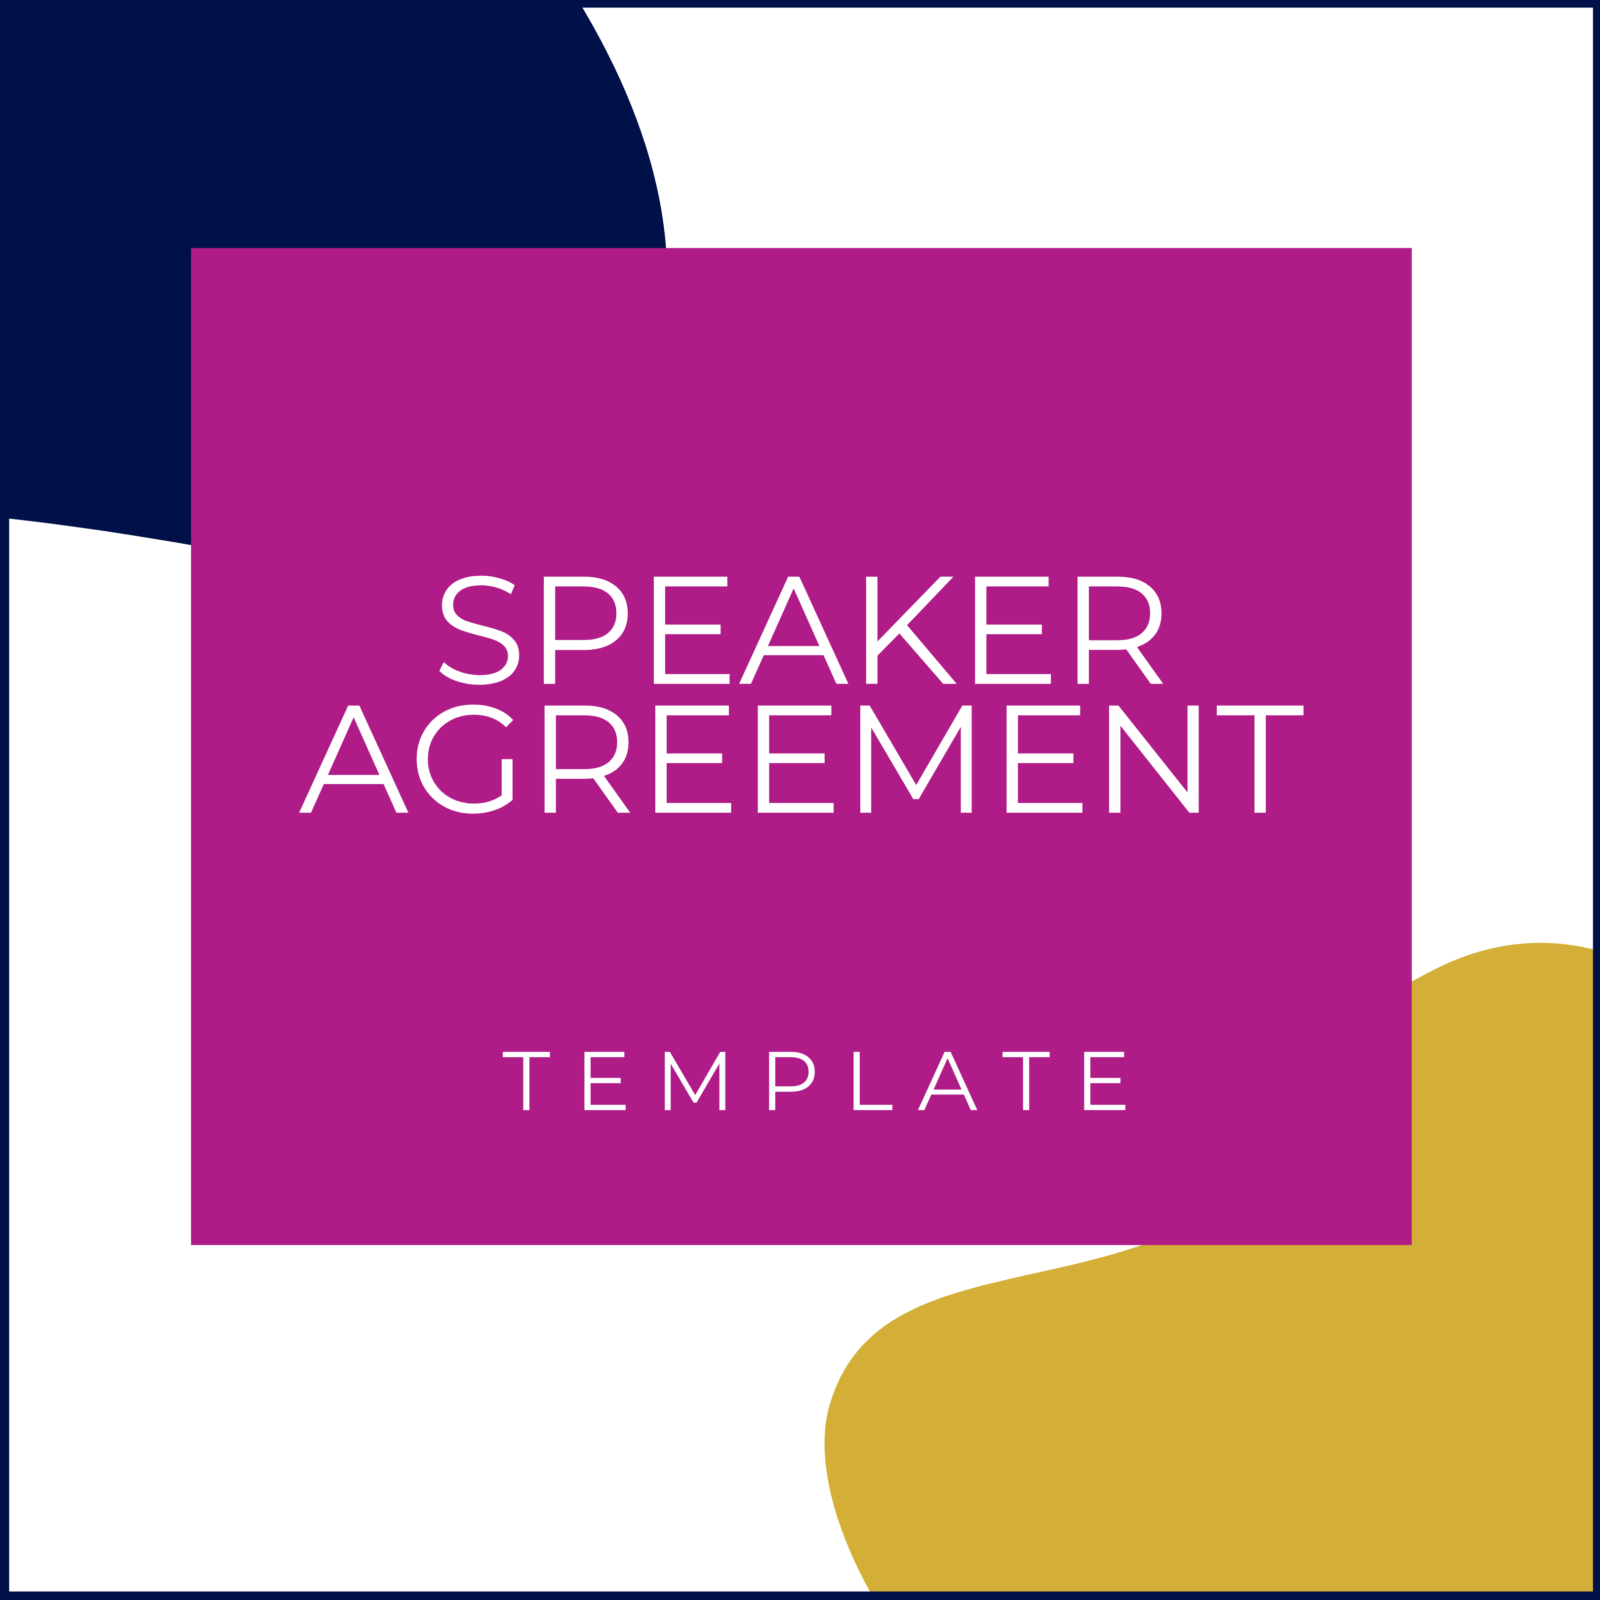 Speaker Agreement Template Boss Contract Society